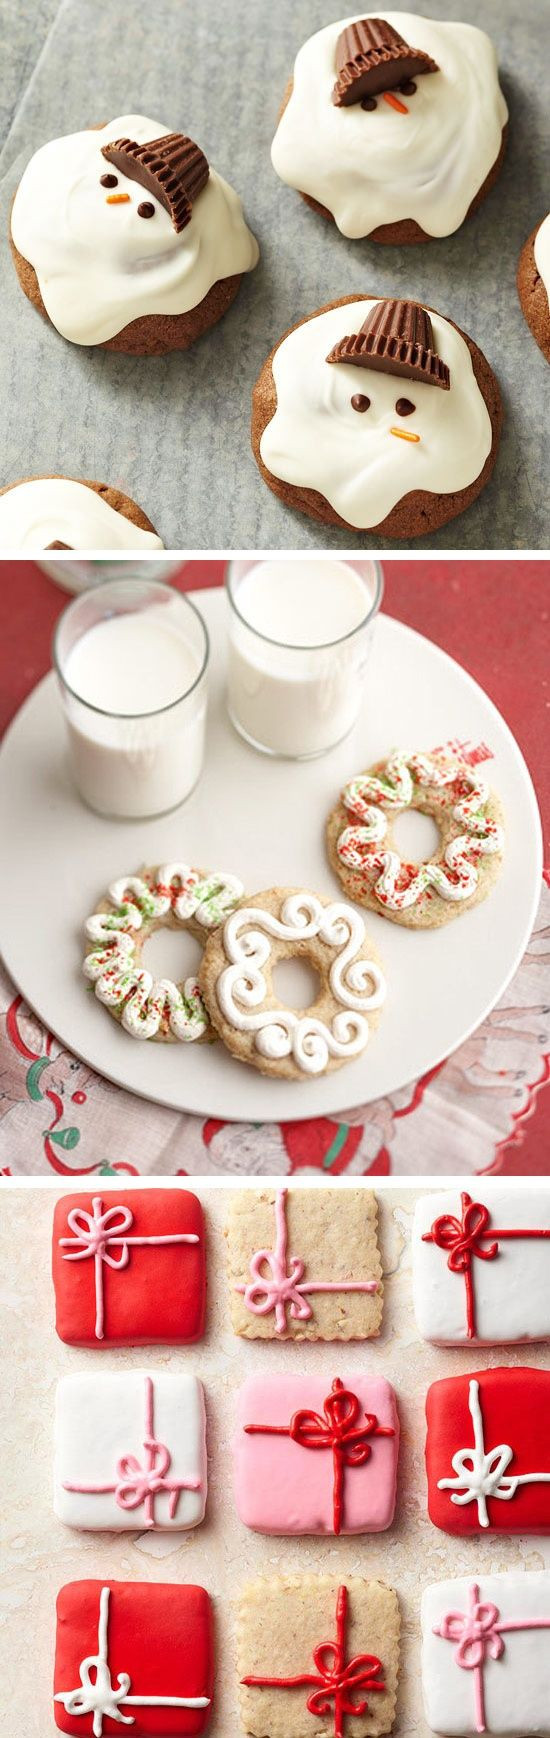 Christmas Cookies Pinterest
 692 best images about Christmas on Pinterest